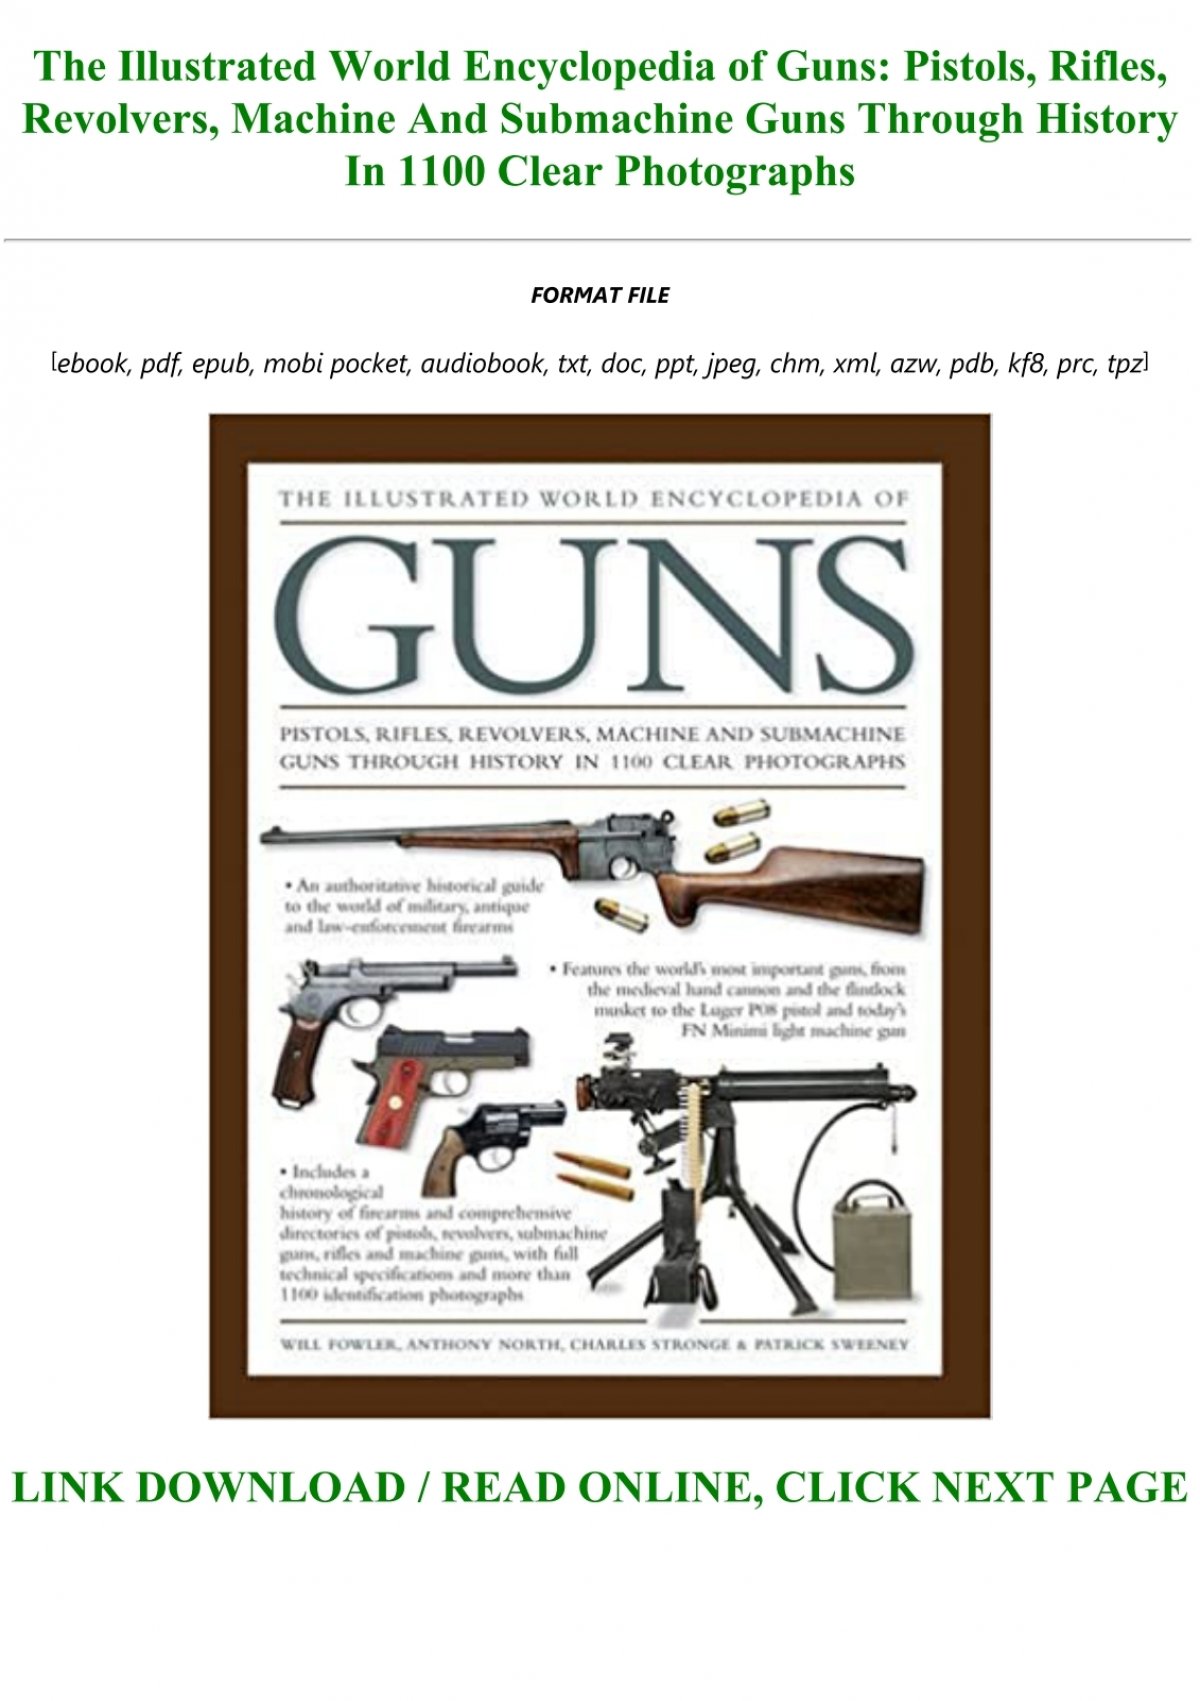 the illustrated world encyclopedia of guns pdf download